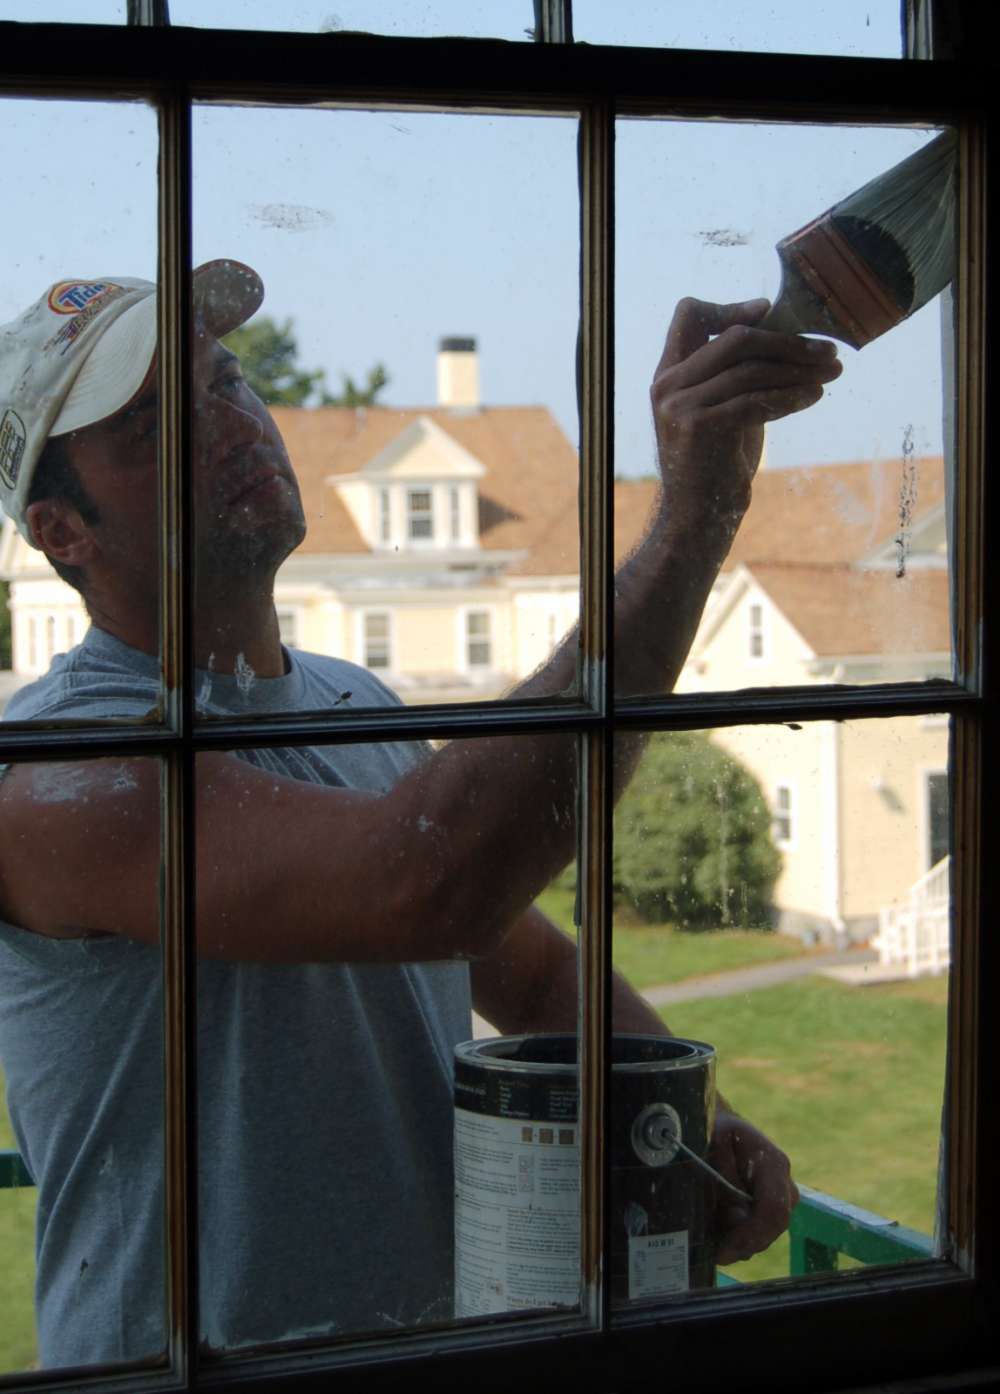 Through a window, a painter is seen applying a brush to the frame. The Laudholm farmhouse is in the background.